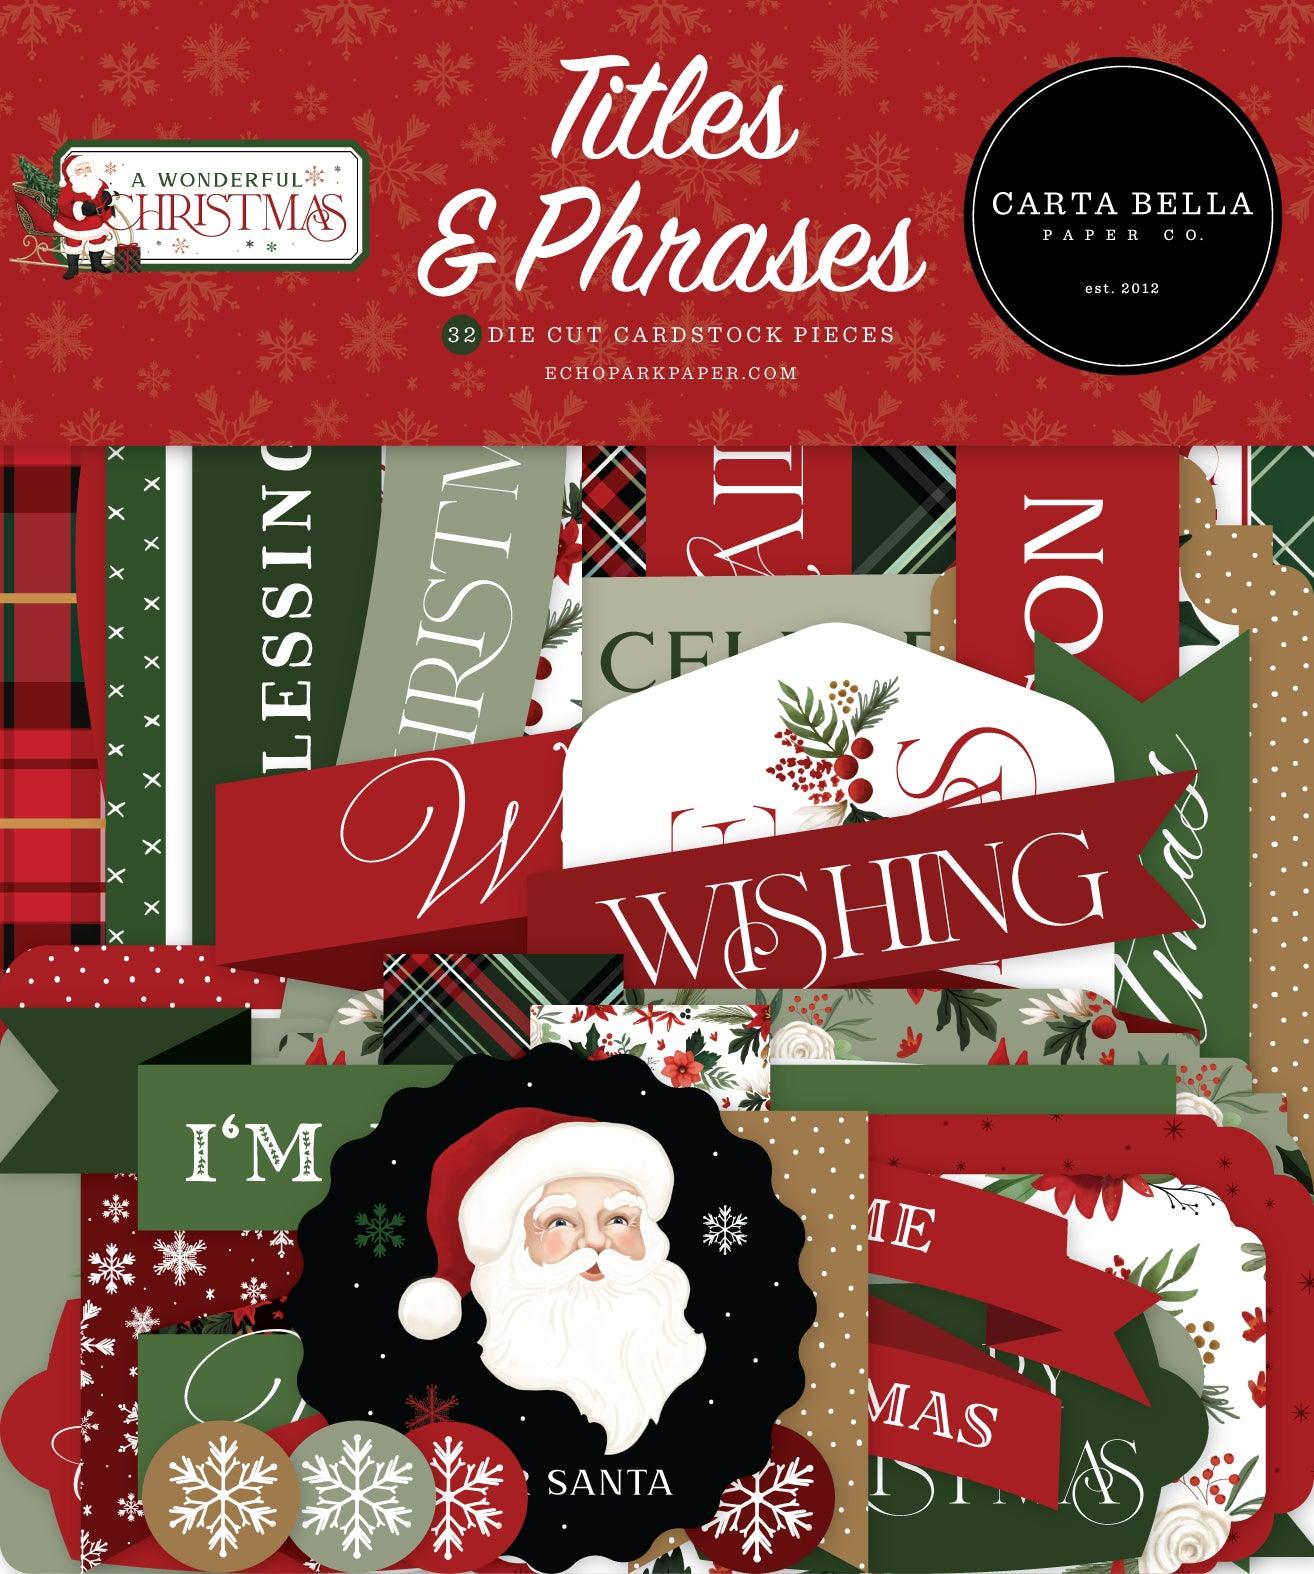 A Wonderful Christmas Collection Scrapbook Titles & Phrases by Carta Bella - Scrapbook Supply Companies